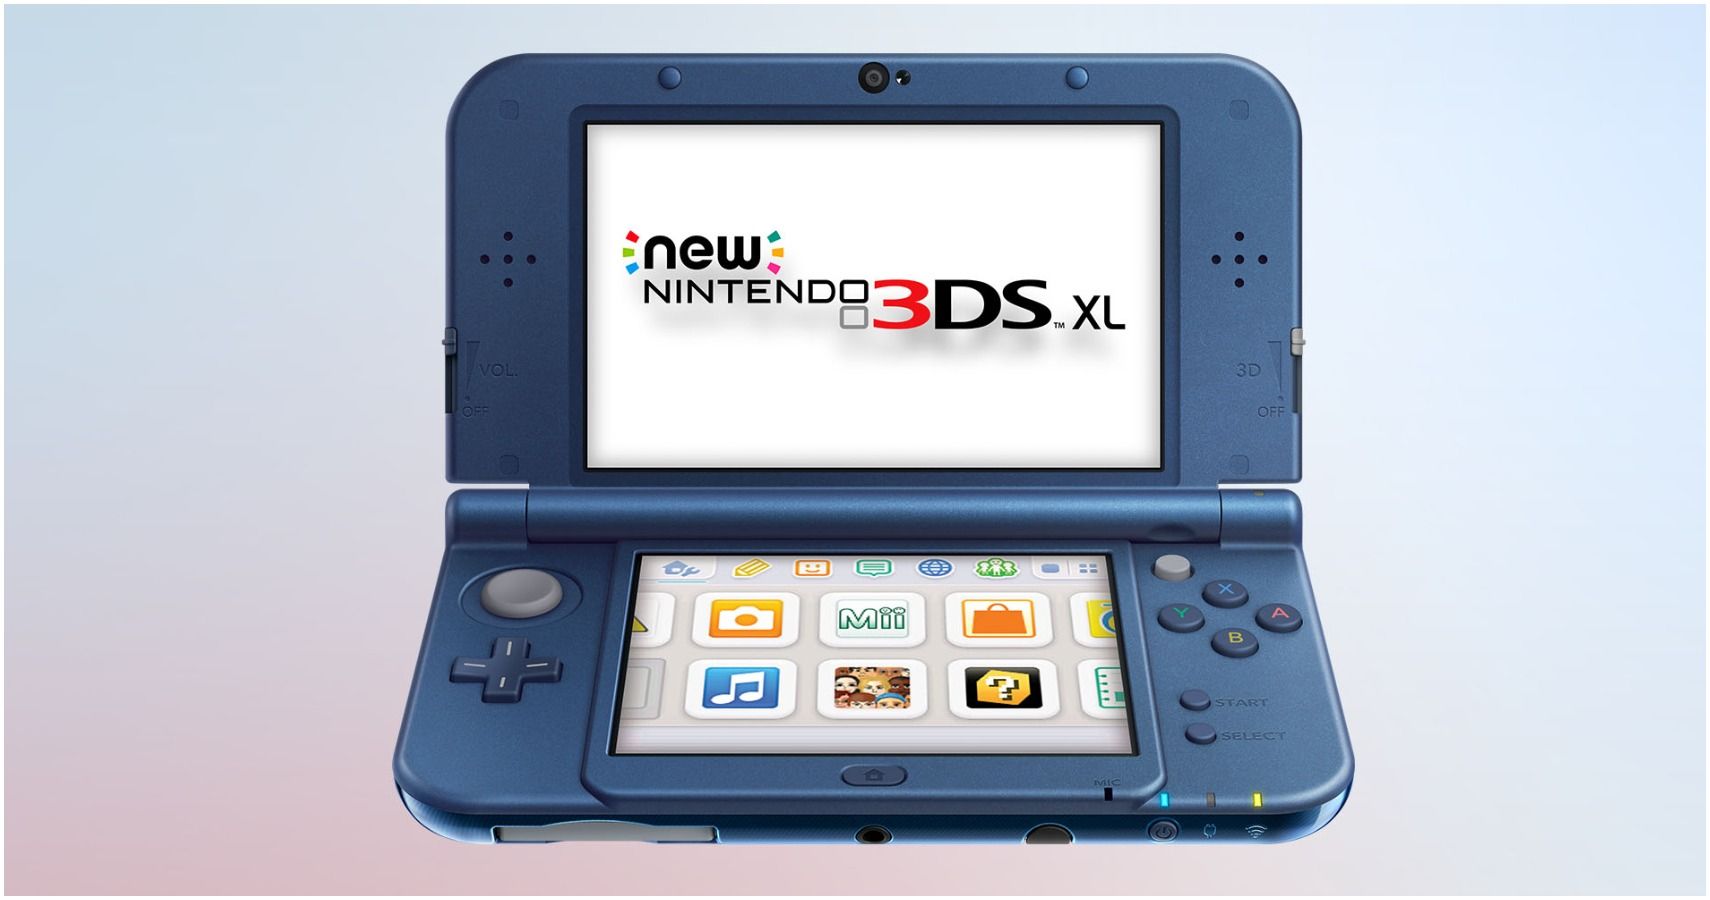 Is 2018 The Final Year For The Nintendo 3DS?